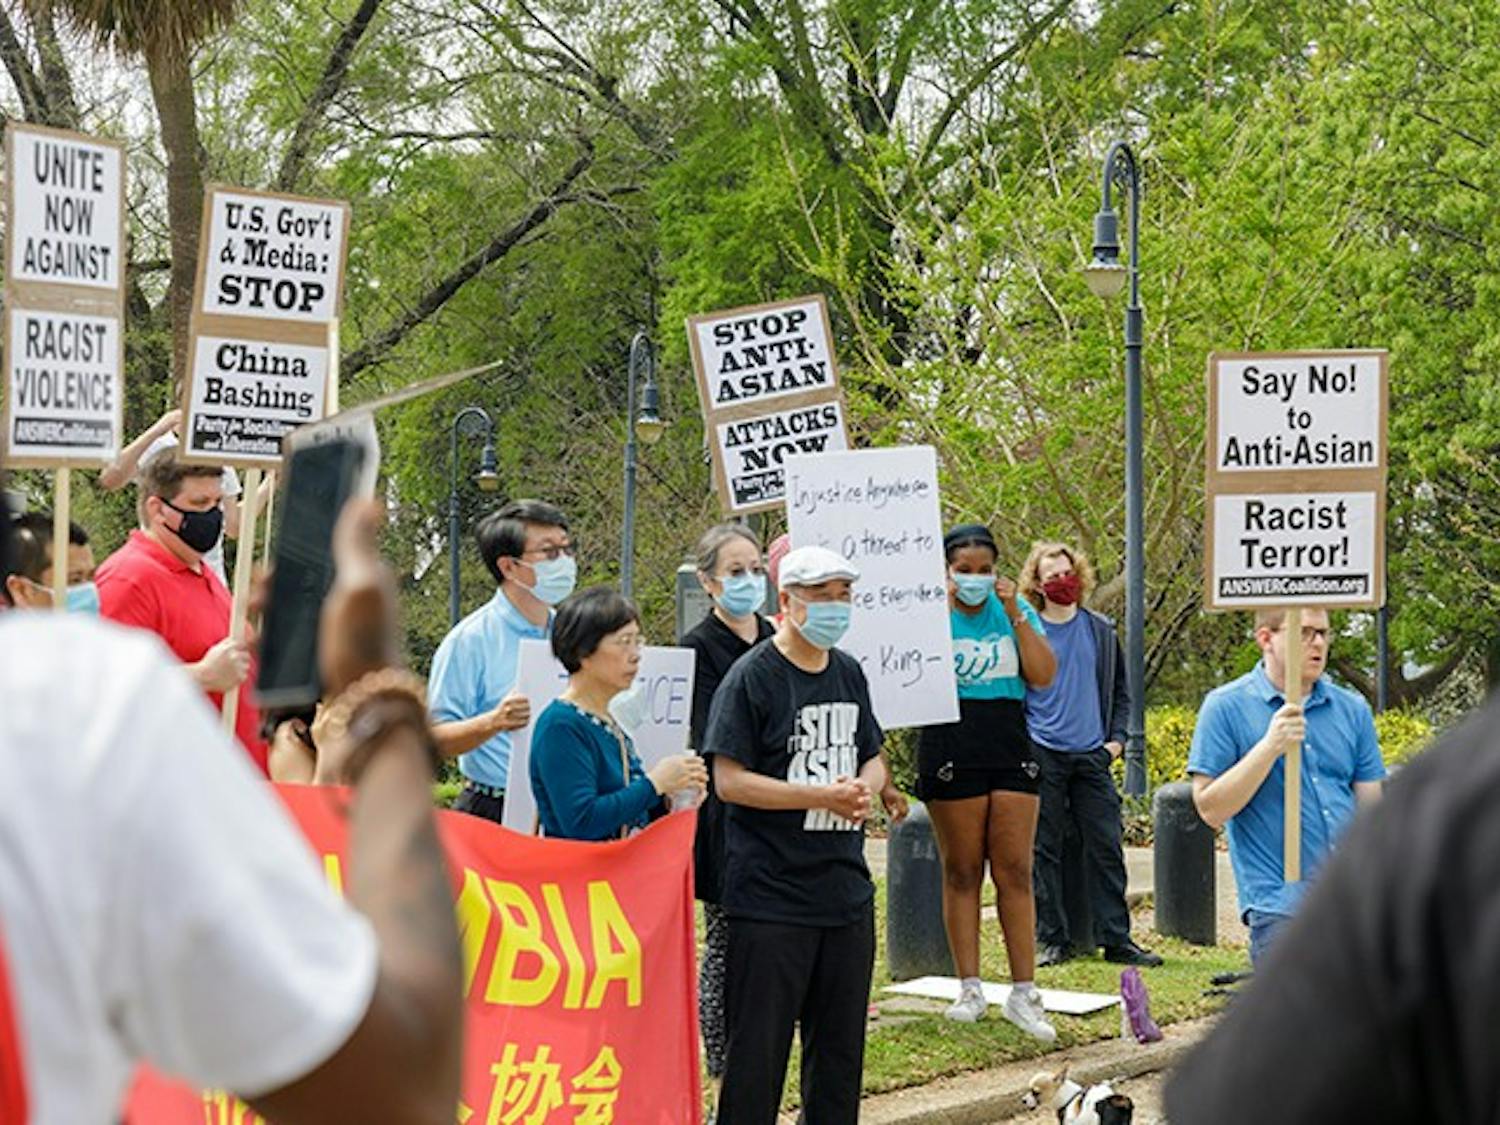  A group holds signs in protest of Asian hate that is happening within Asian communities.
